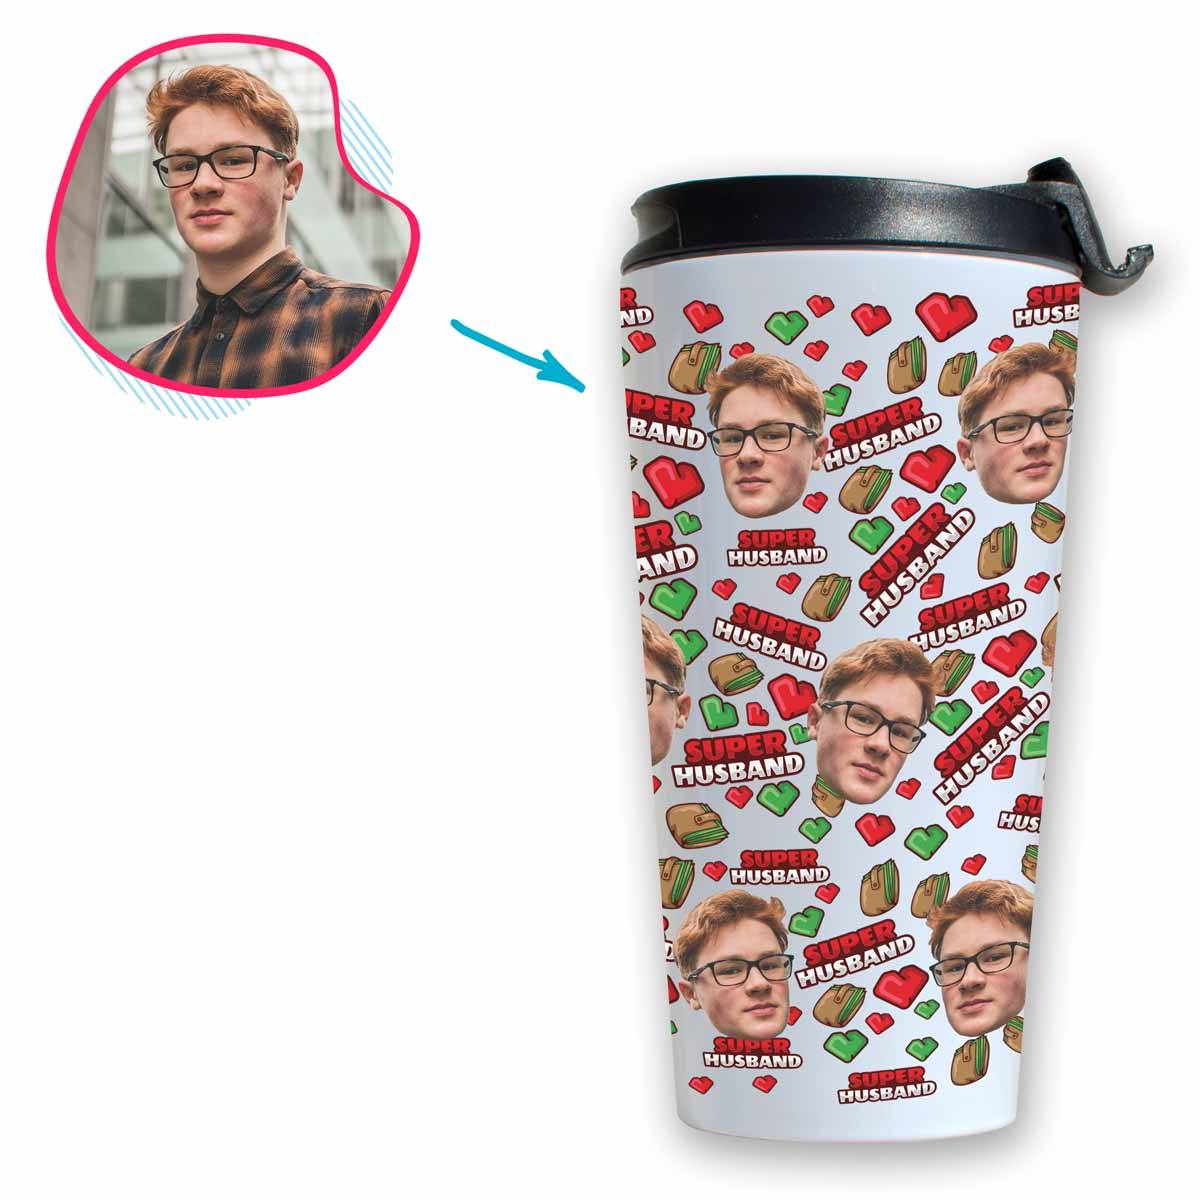 White Husband personalized travel mug with photo of face printed on it